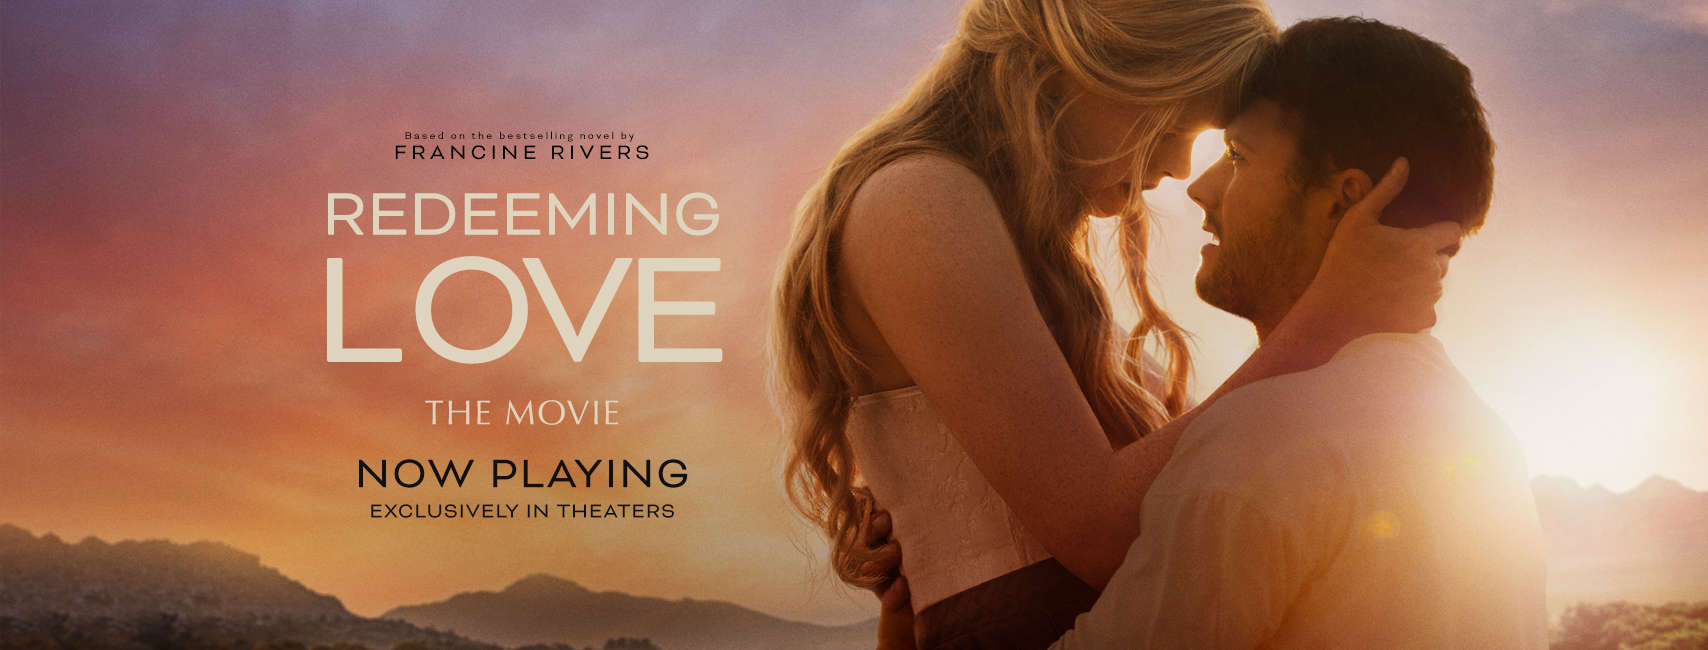 redeeming love movie review christian